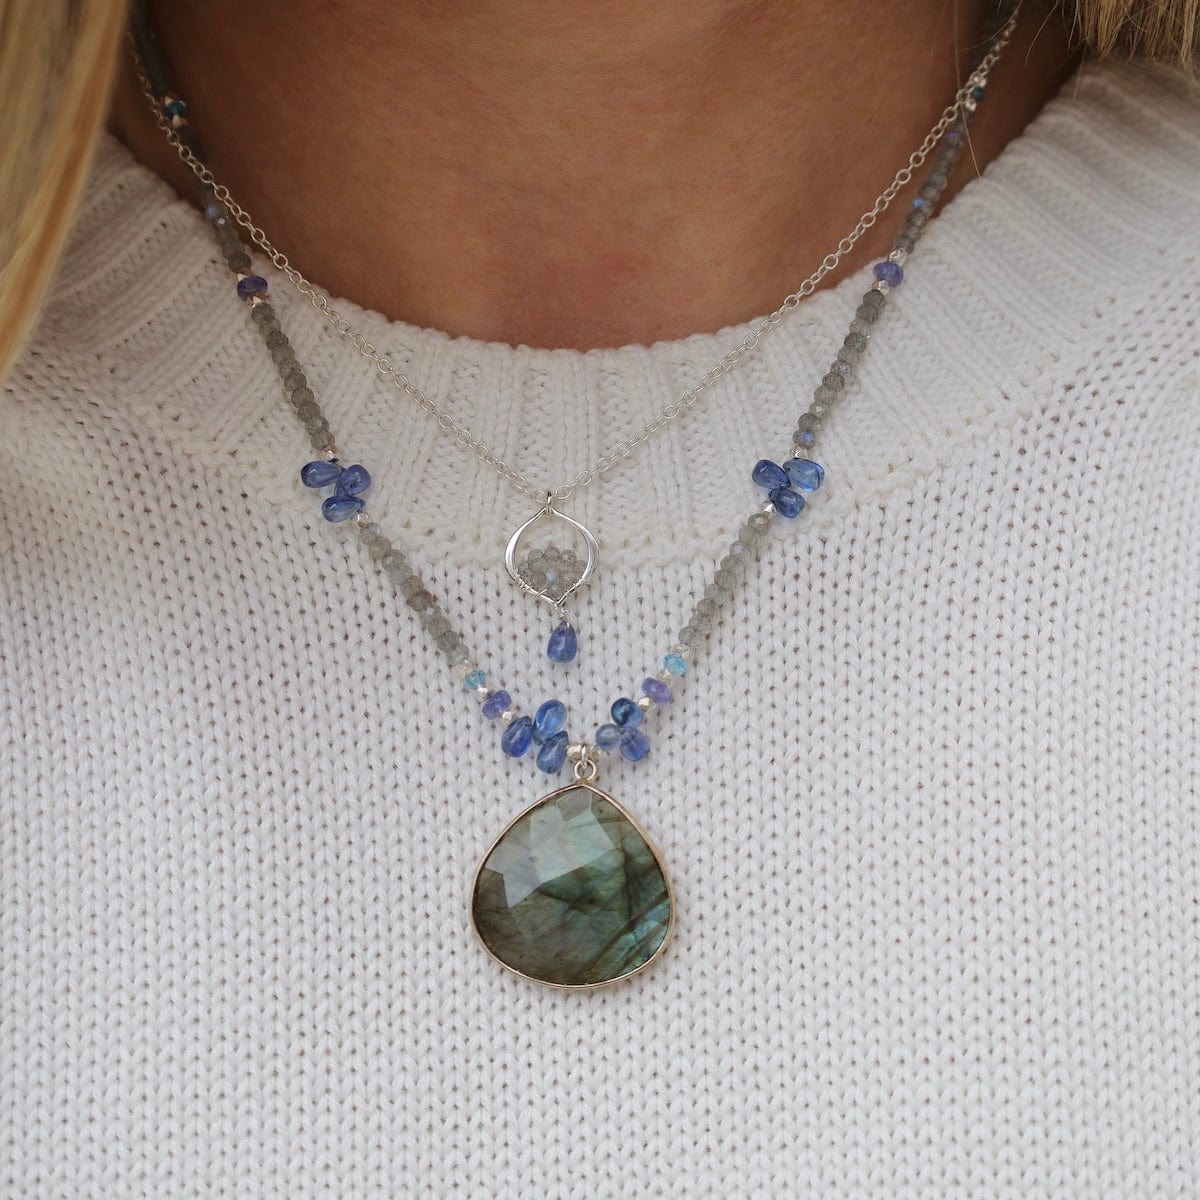 NKL Sterling Silver Tiny Arabesque with Kyanite & Labradorite Necklace